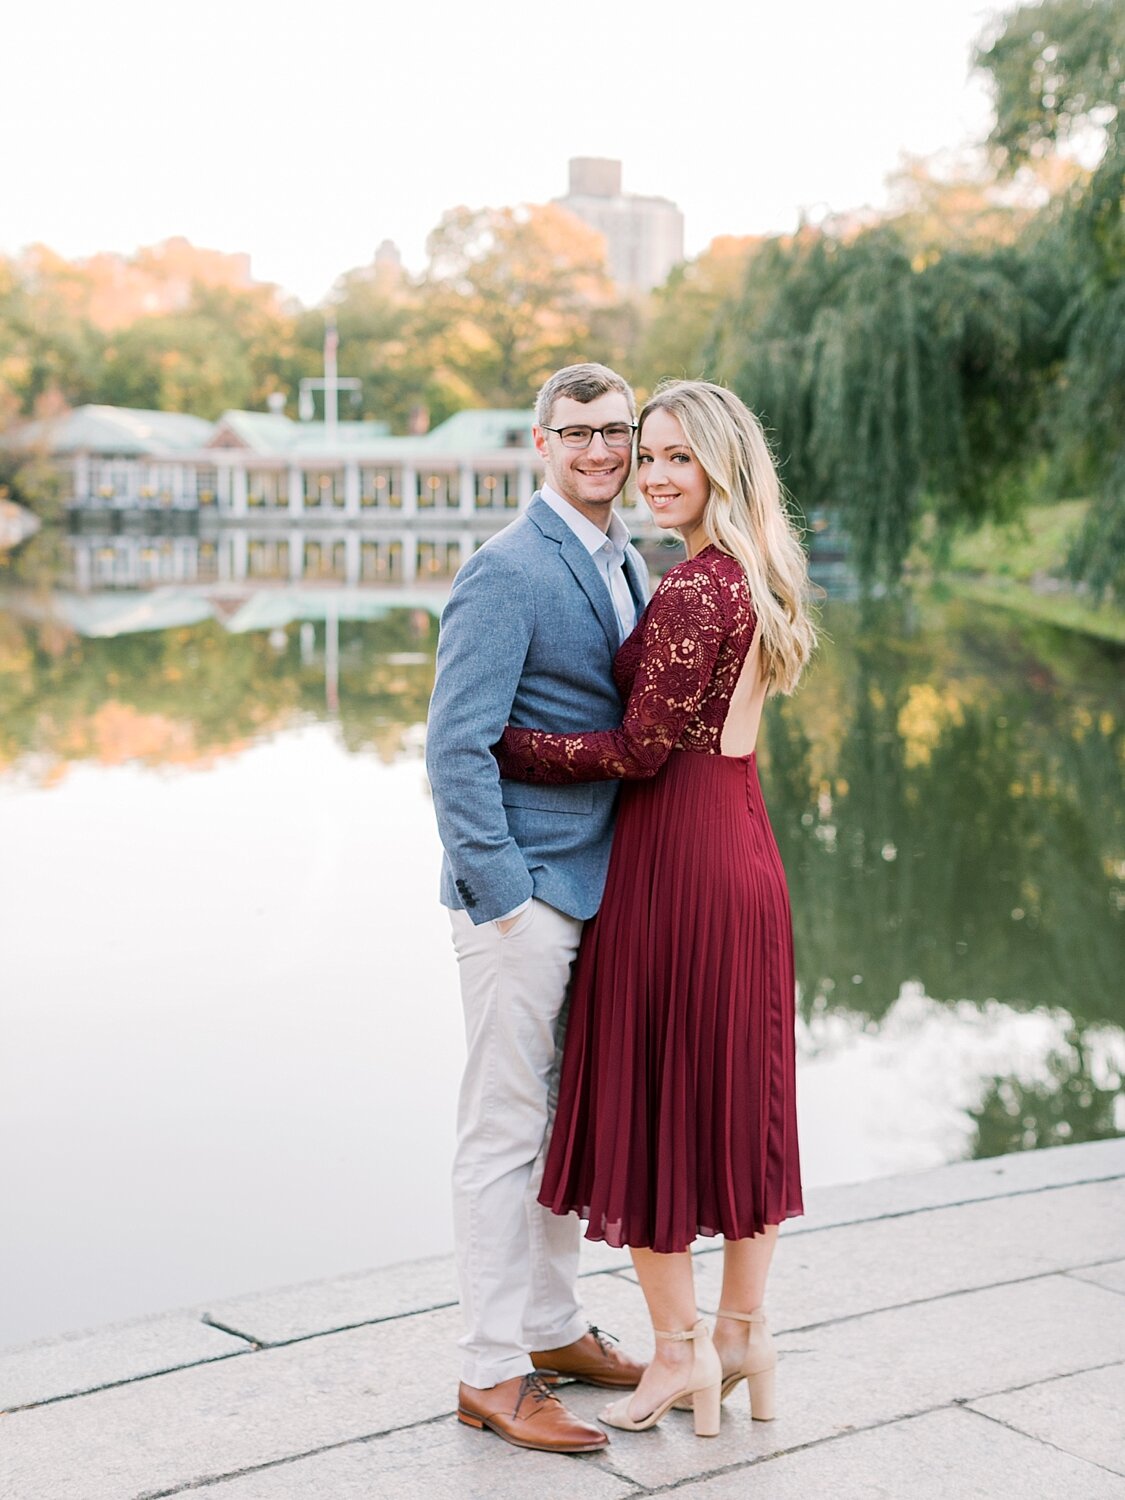 Engagement photos in Central Park by the boathouse with Asher Gardner Photography